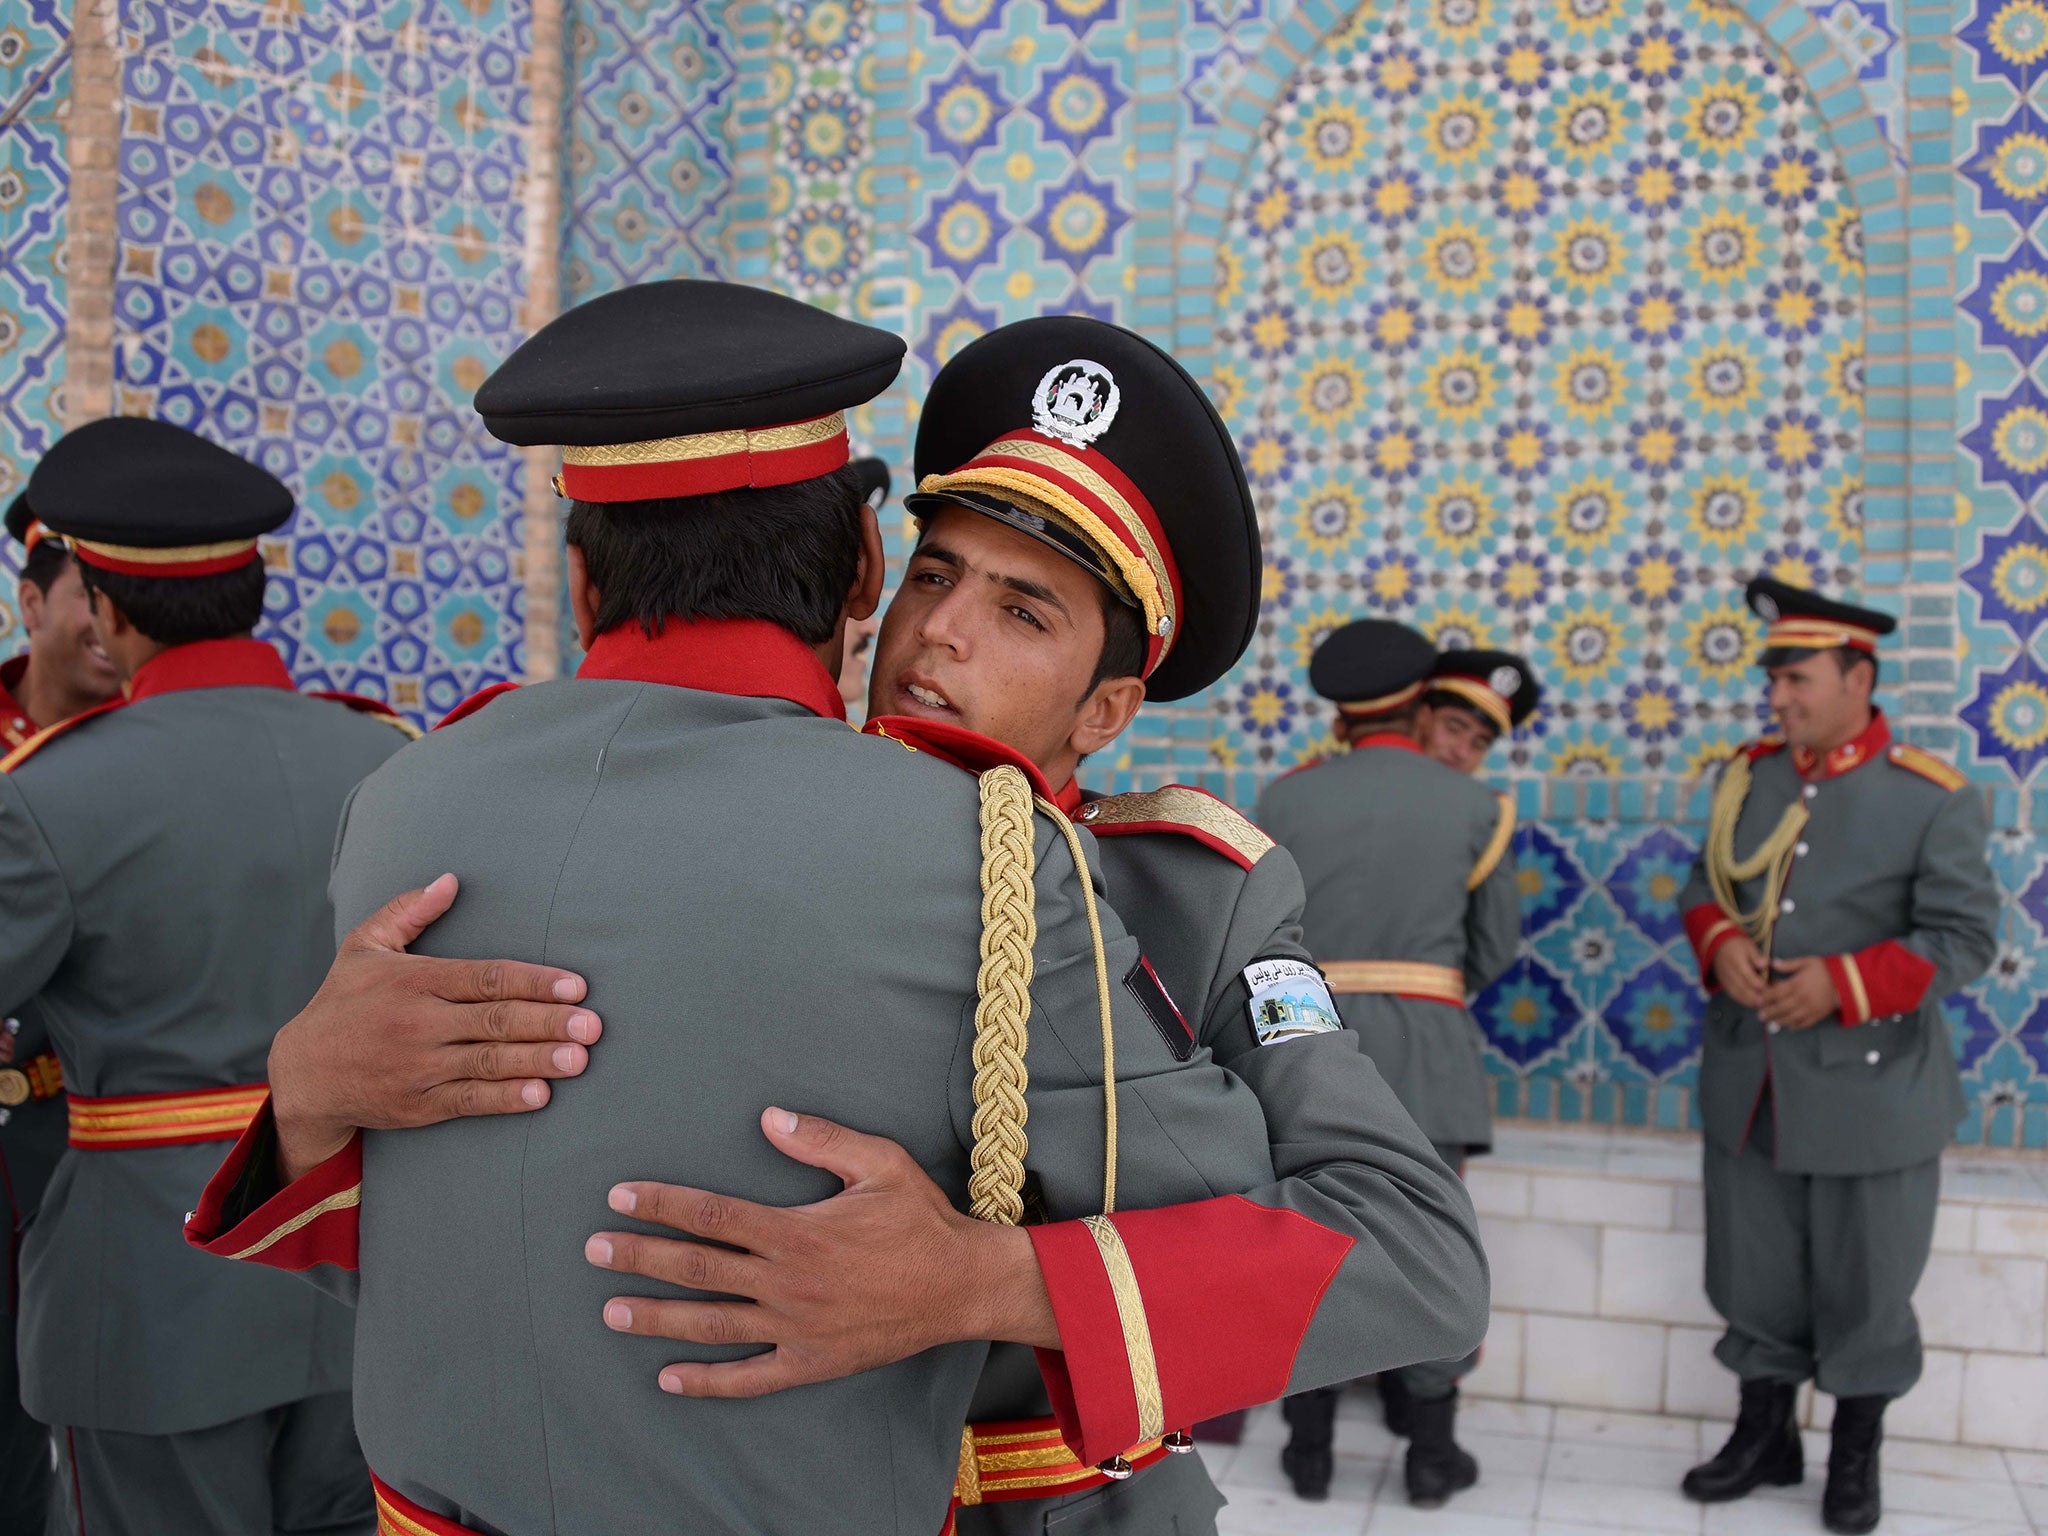 Members of an Afghan guard of honour greet each other after offering Eid-al-Adha prayers at the Hazrat-i- Ali shrine in Mazar-i Sharif on September 12, 2016